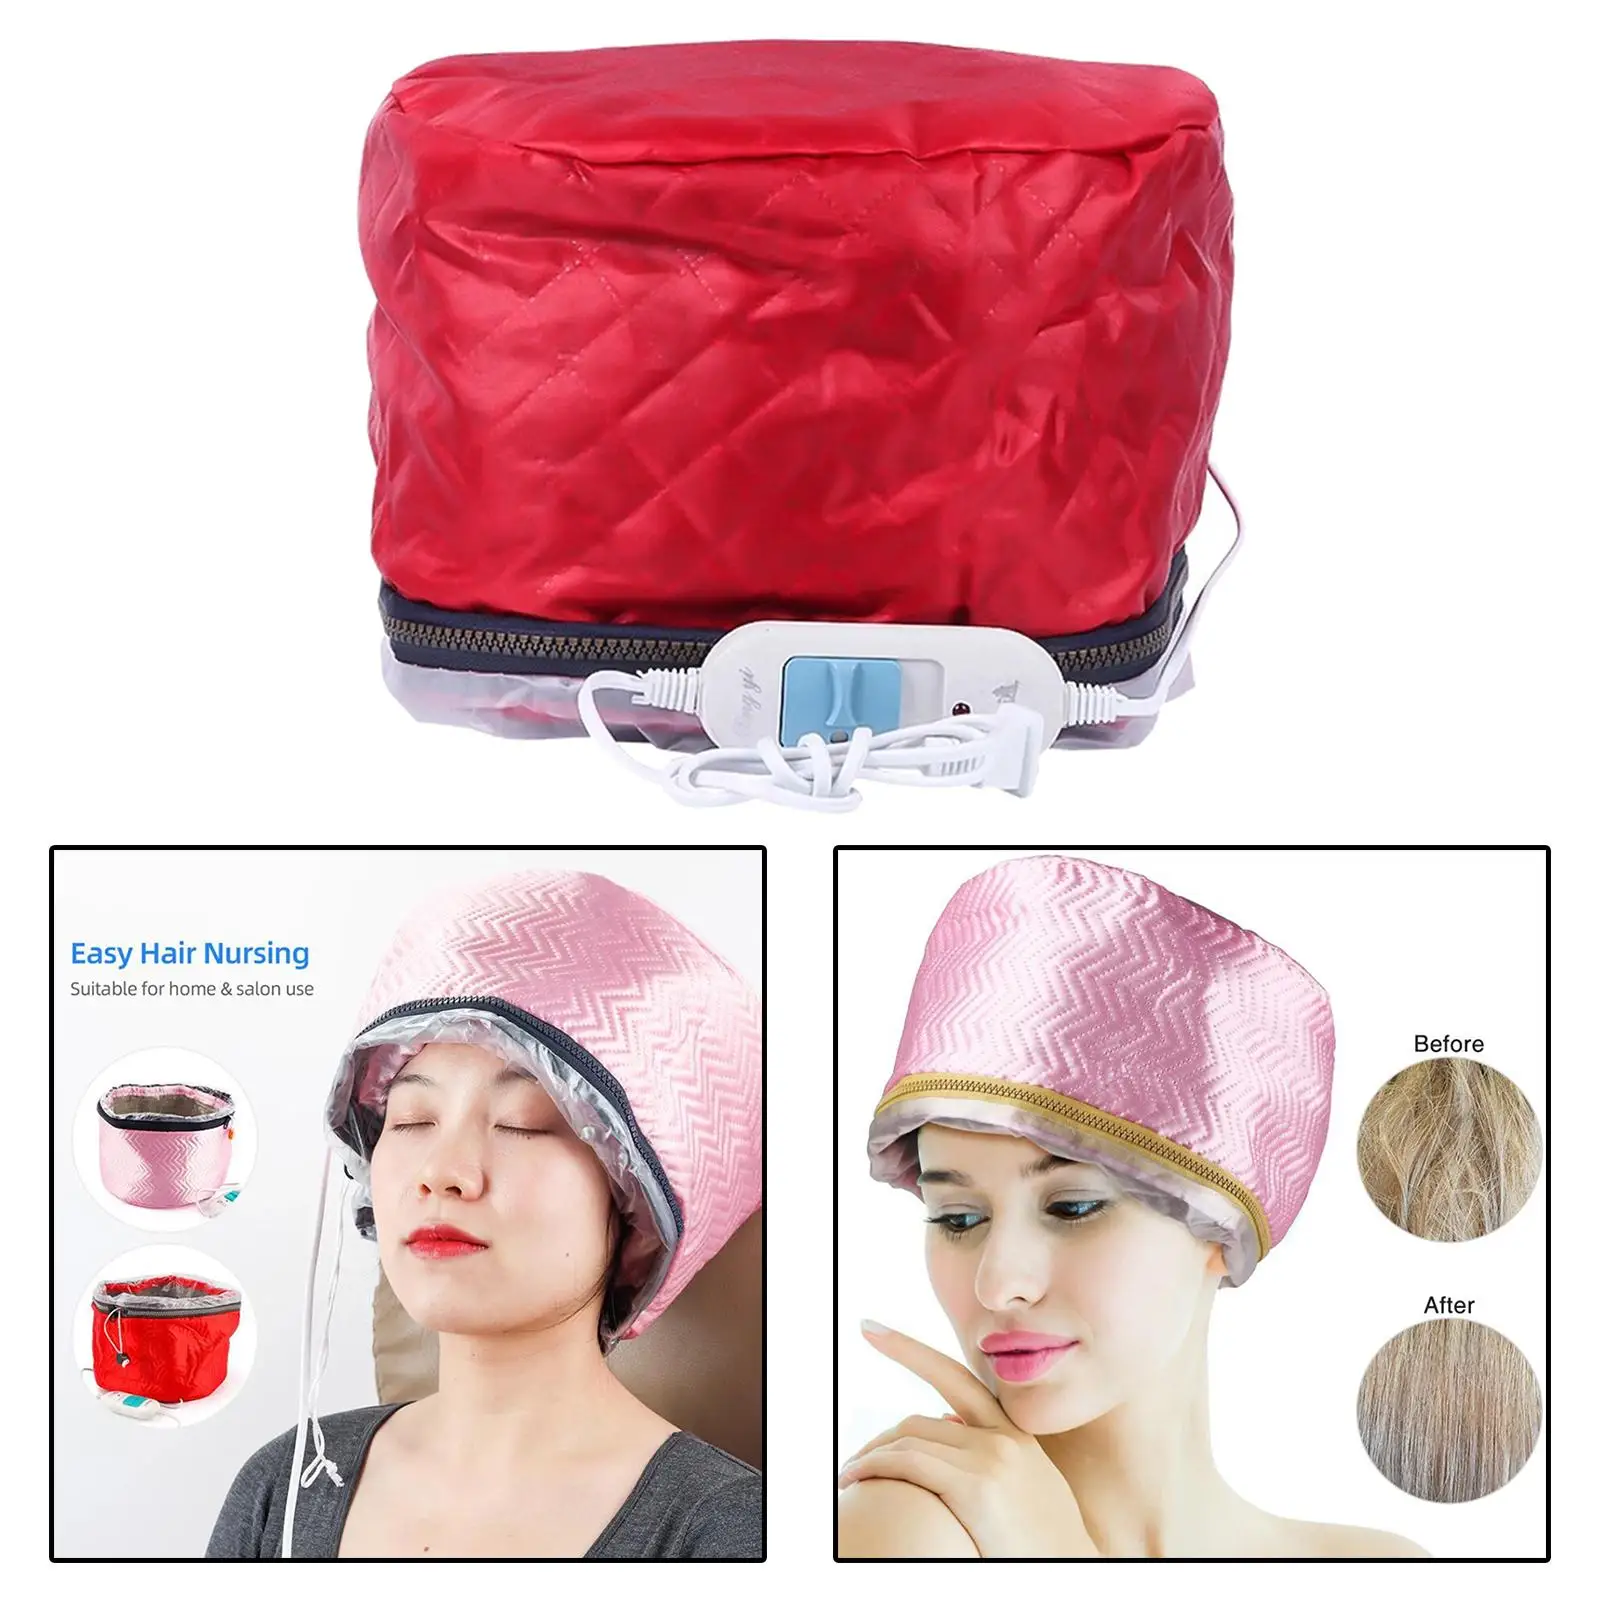 Hair Heating Caps Steamer 3 Modes Household Safe Red Microwave Hot Caps for Deep  Conditioning Salon Curly Hair Curling Hair SPA|Caps, Foils & Wraps| -  AliExpress